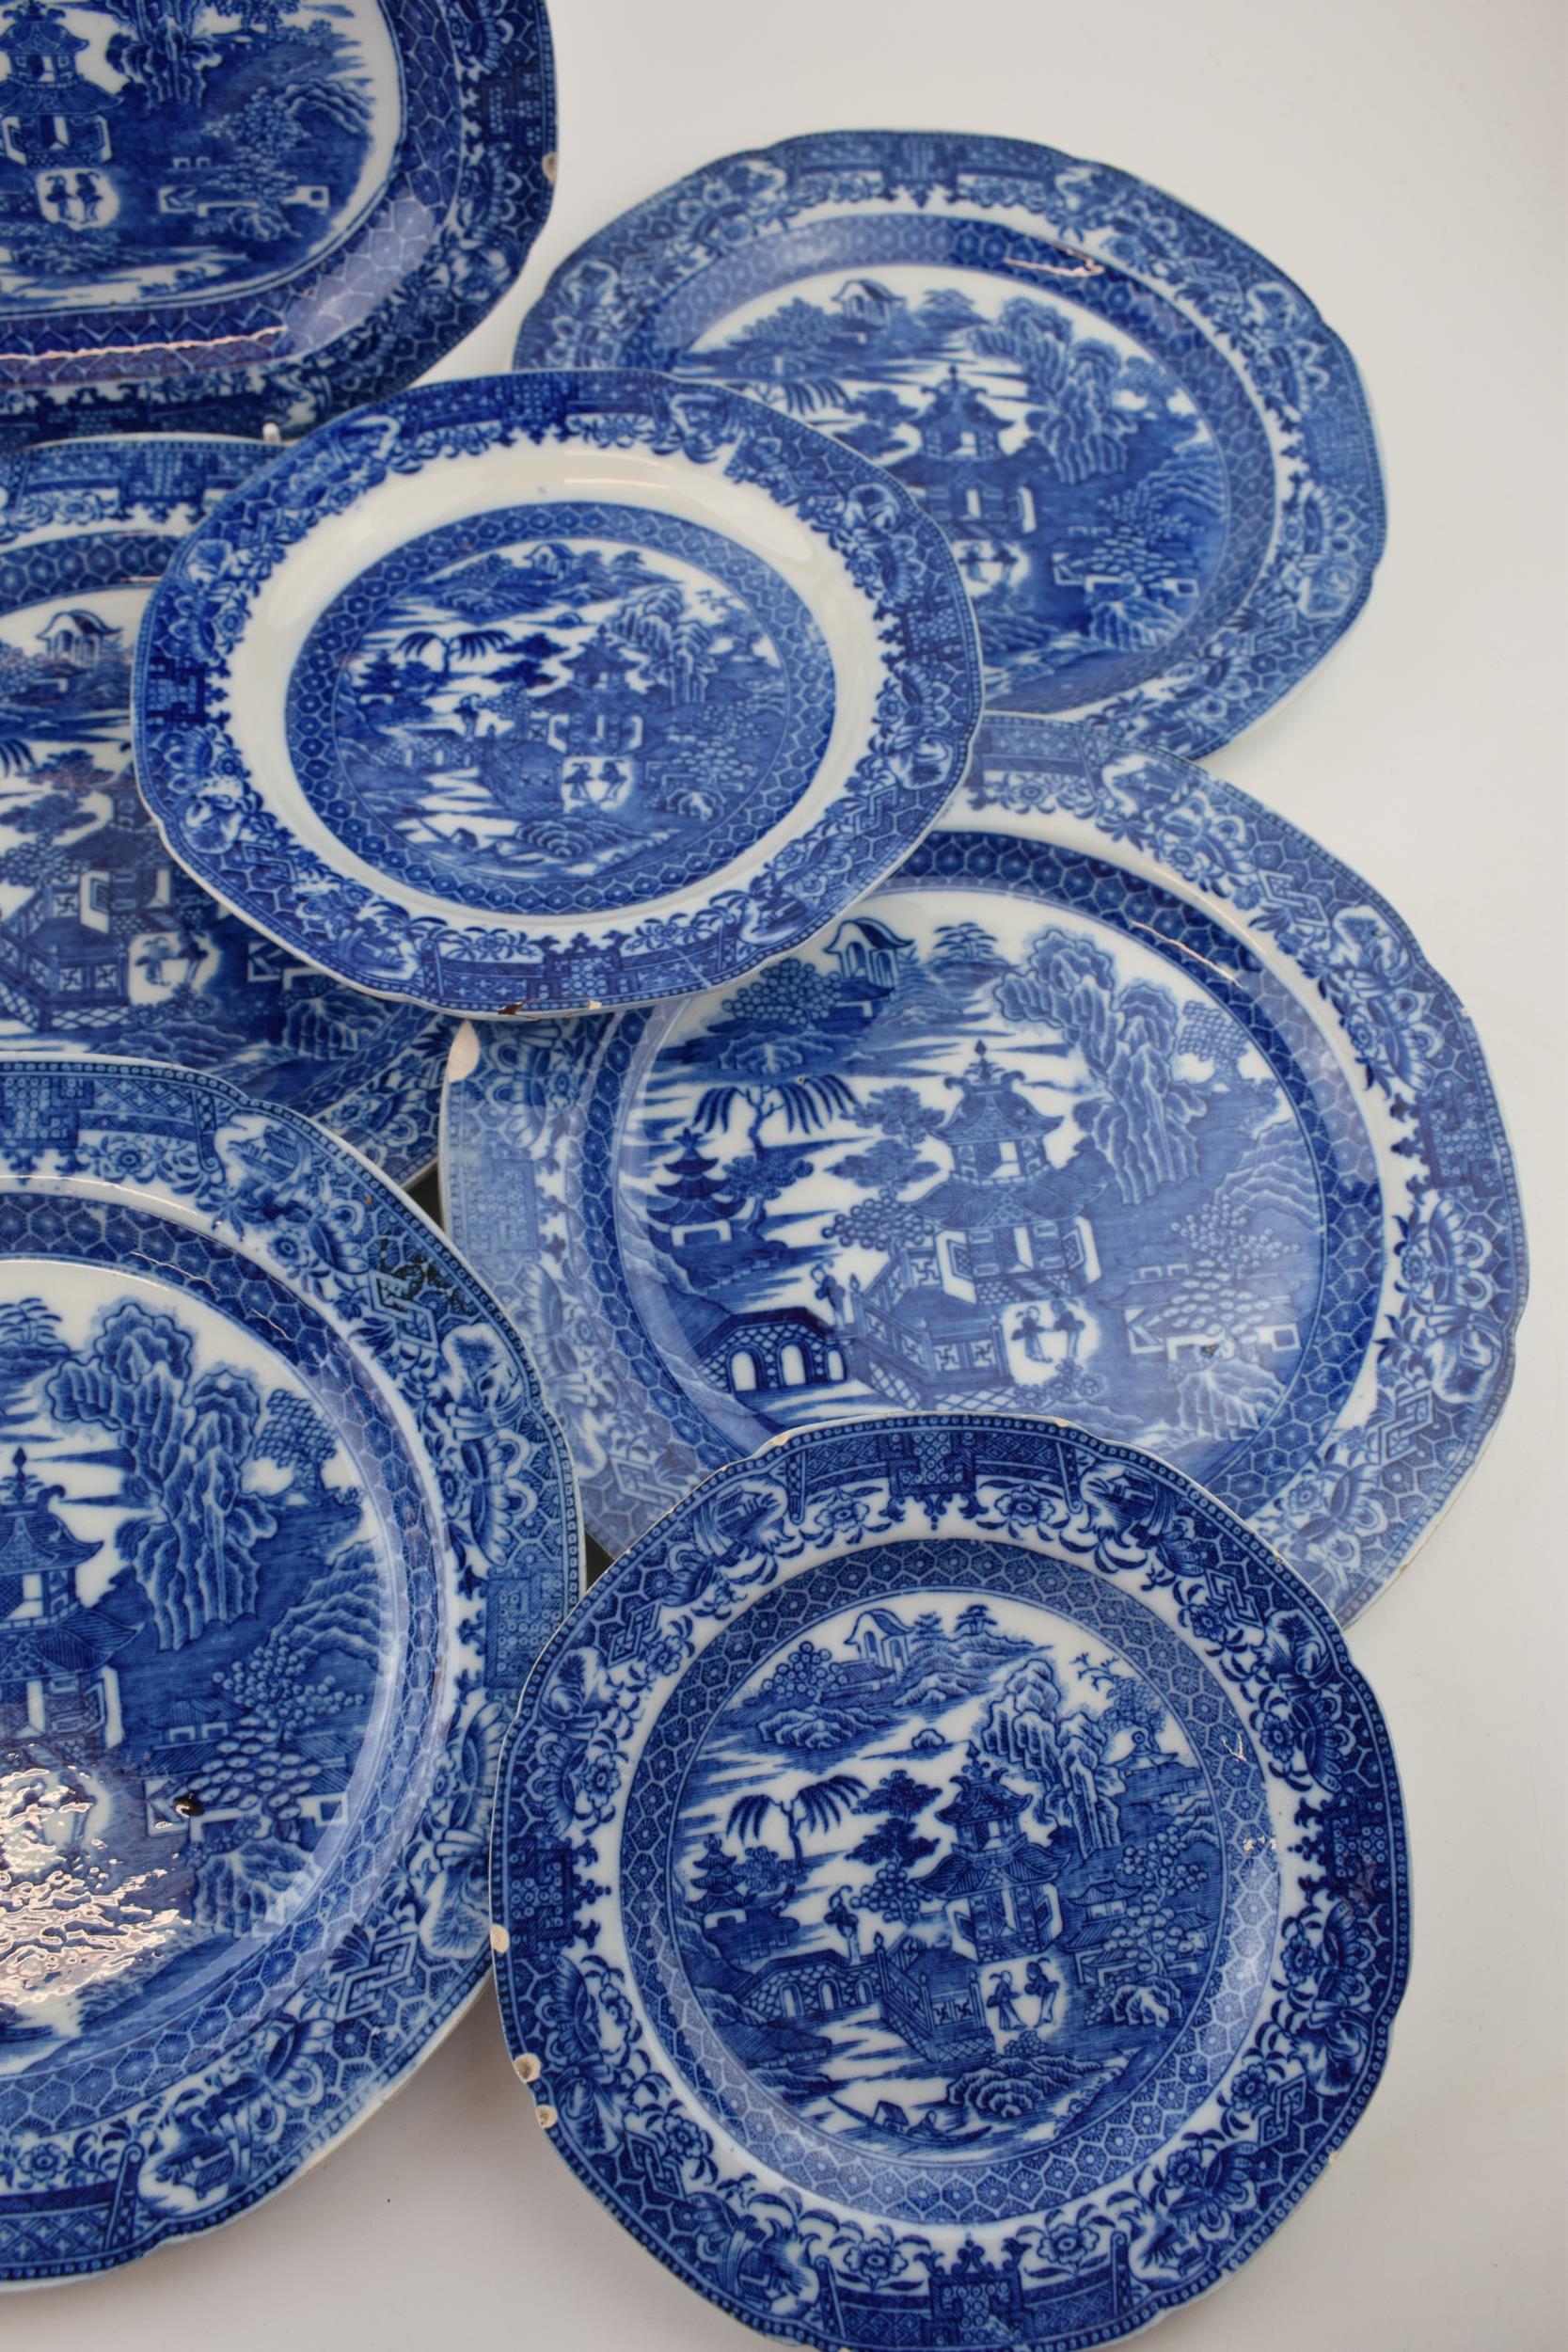 A group of late 18th century pearlware blue and white transfer-printed “Two Figures” pattern - Image 2 of 5